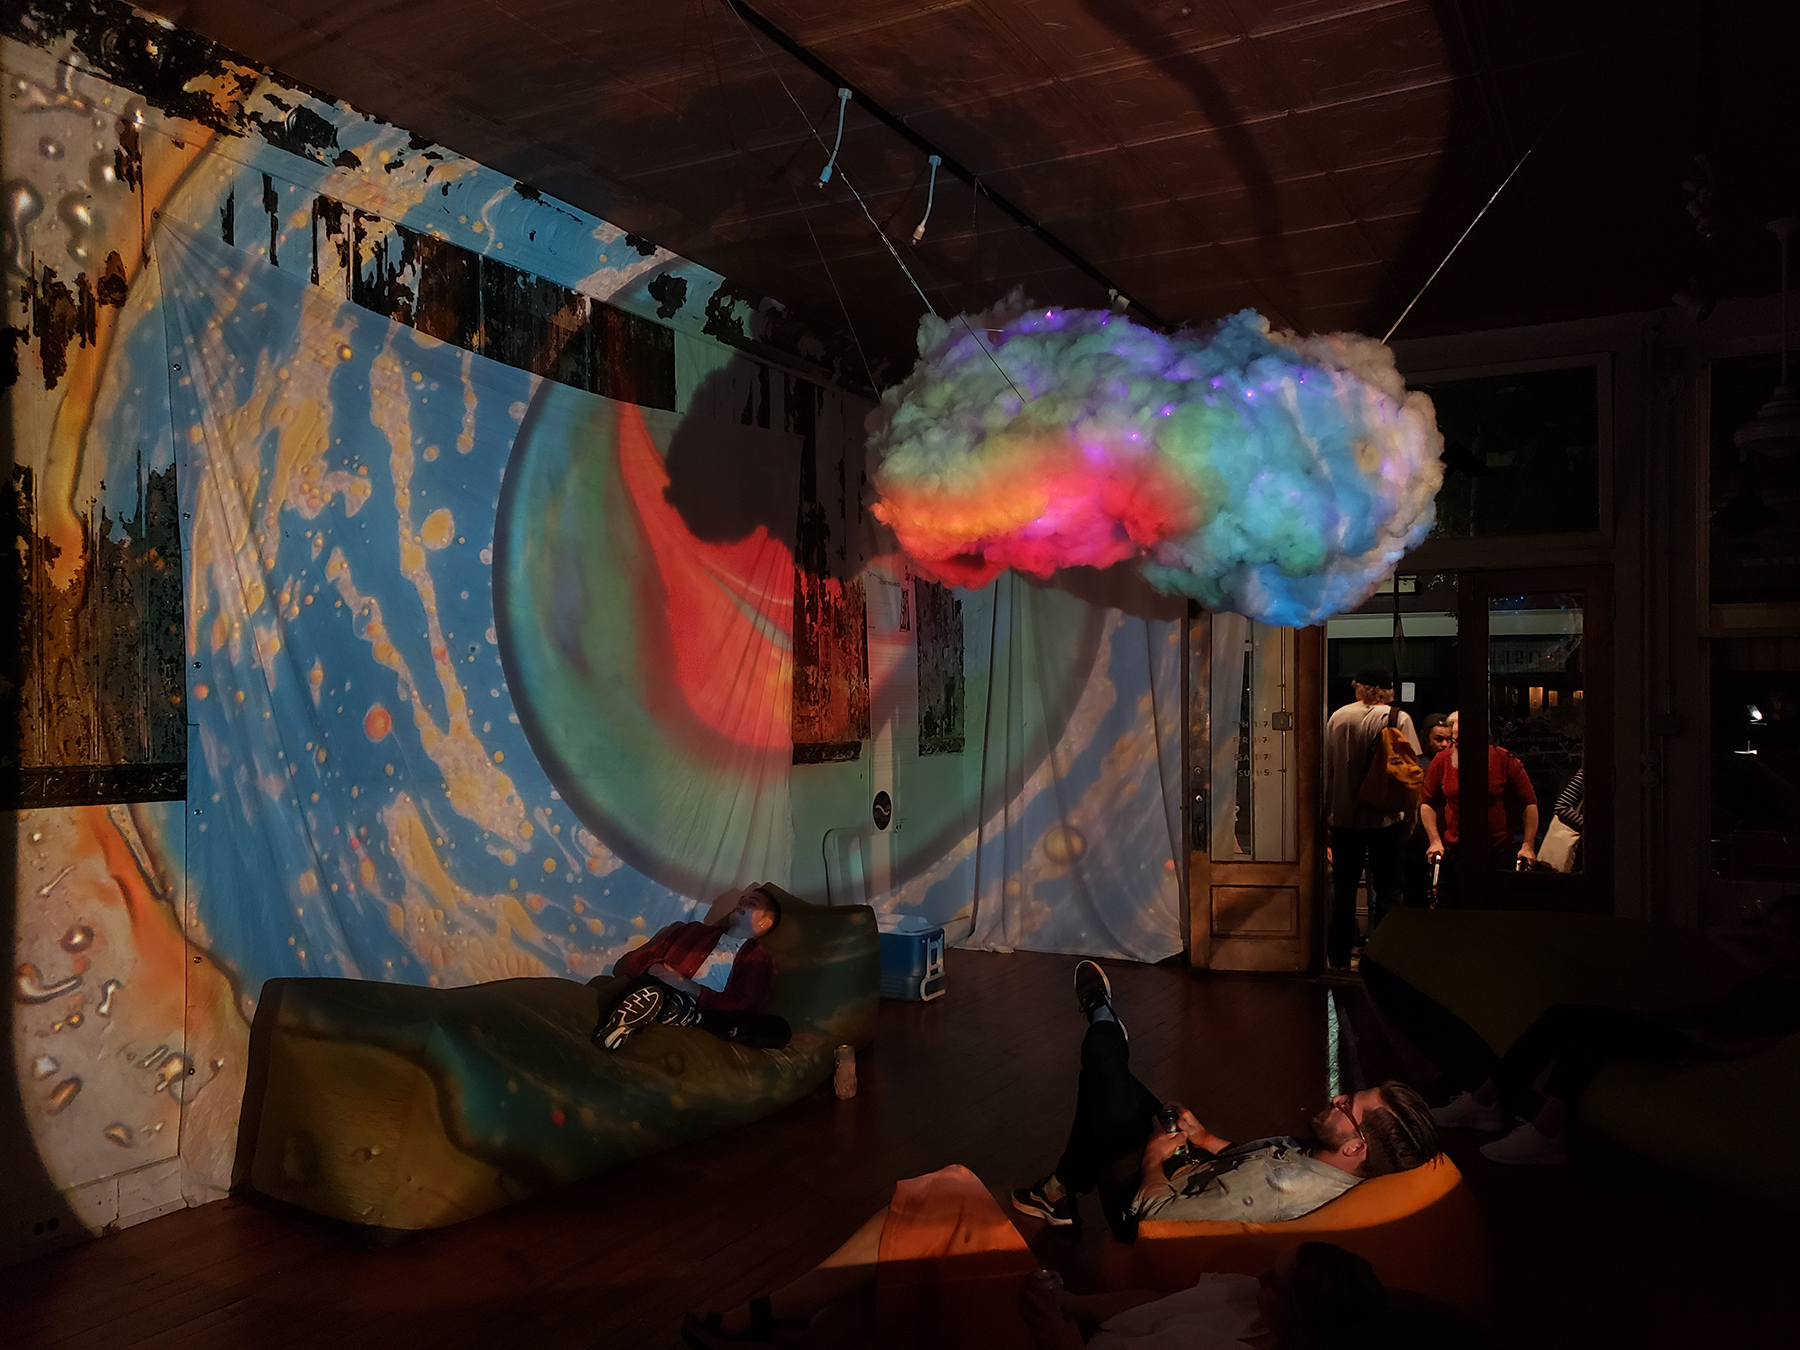 Sound installation with cloud and colorful lights